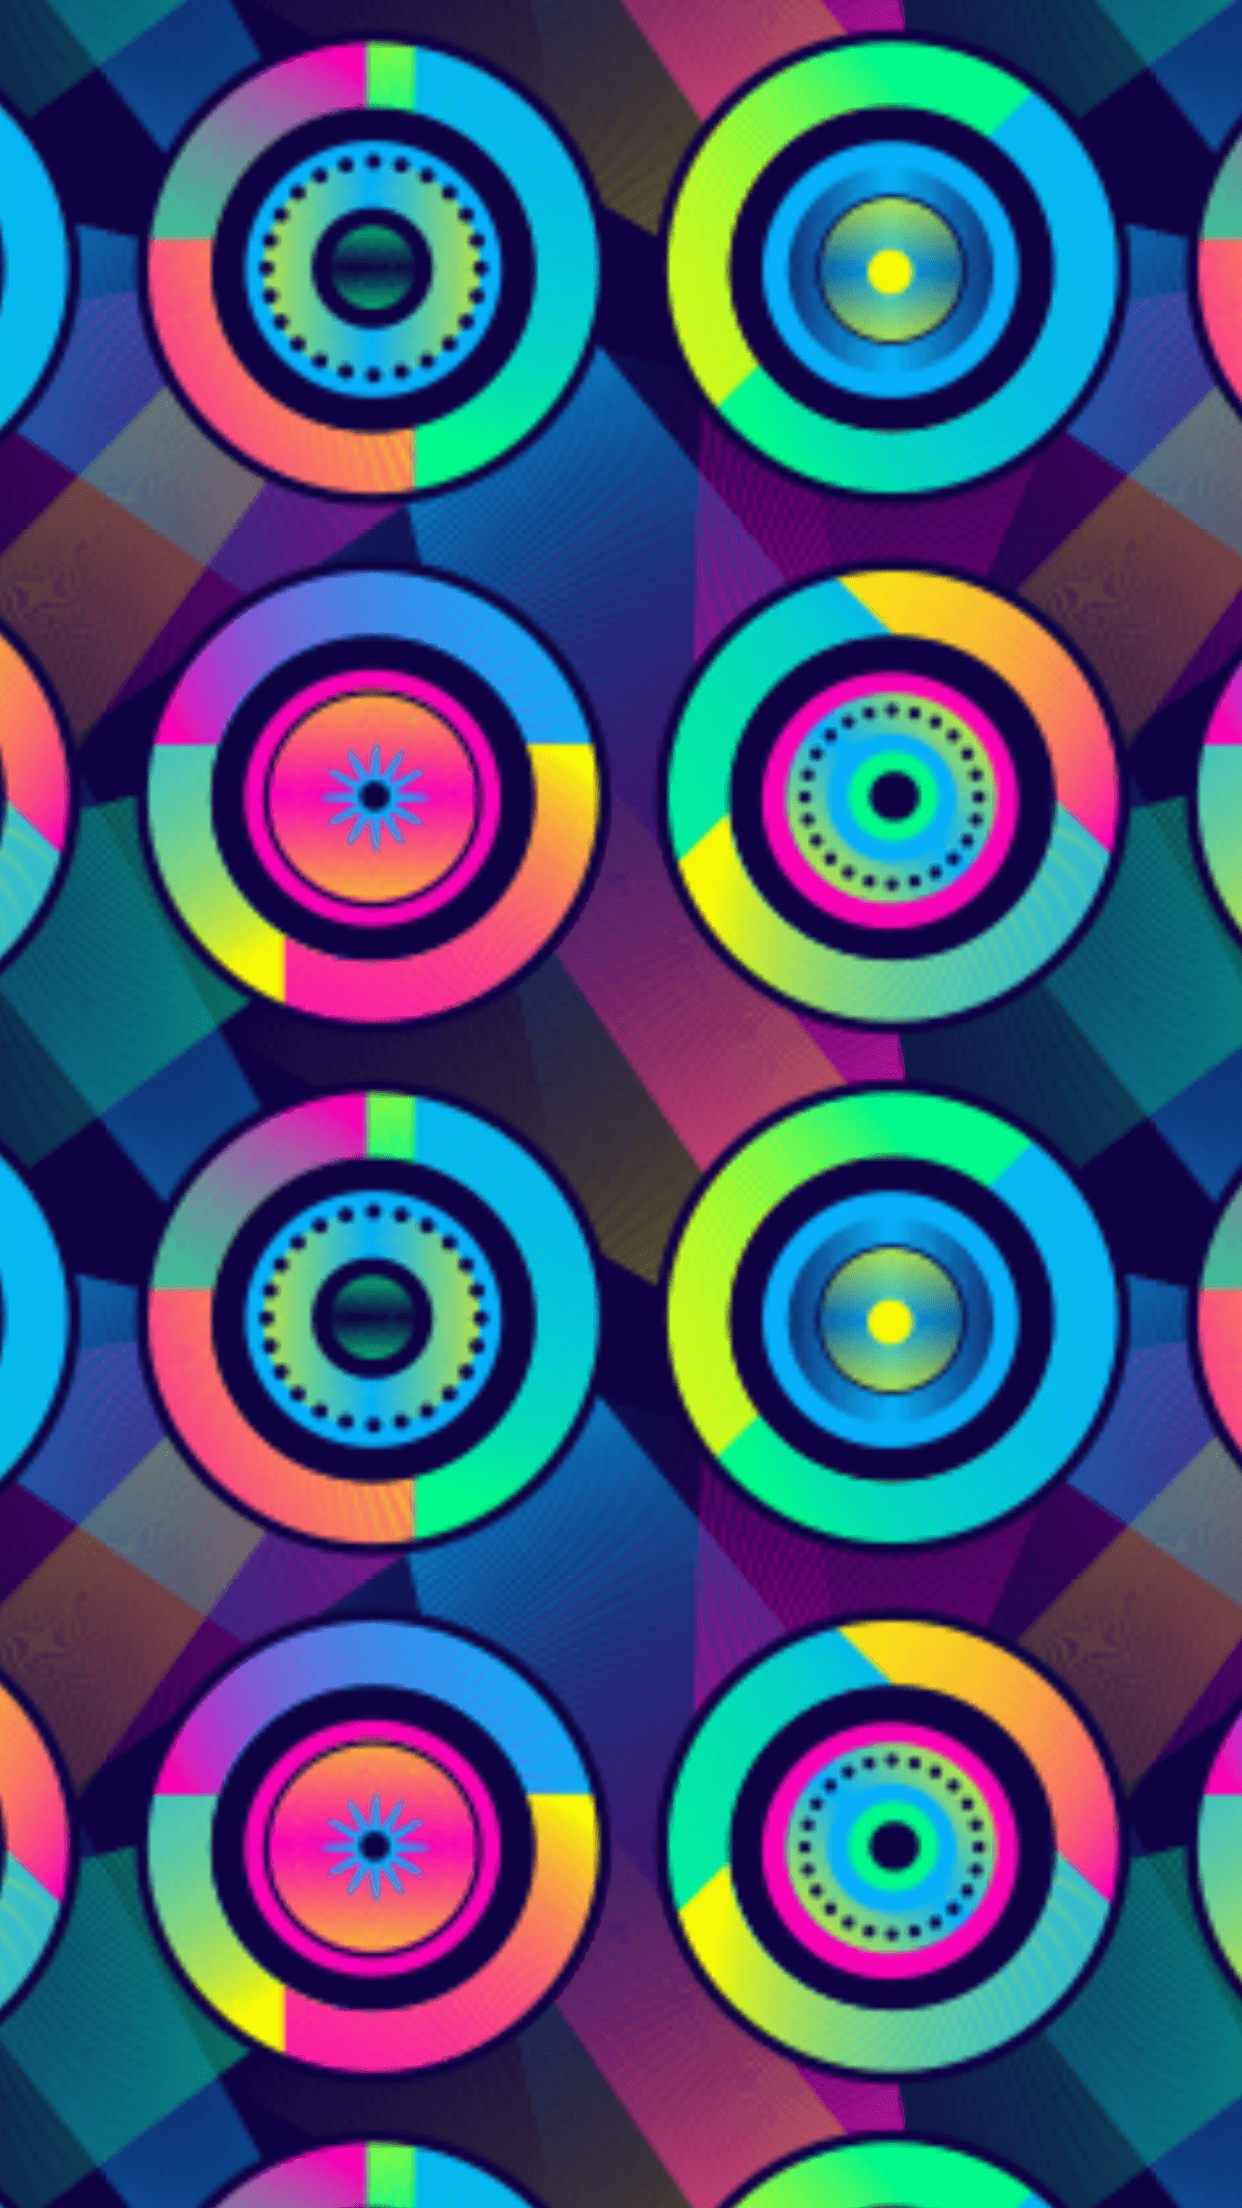 Colorful Psychedelic Circles Wallpaper. *Abstract and Geometric